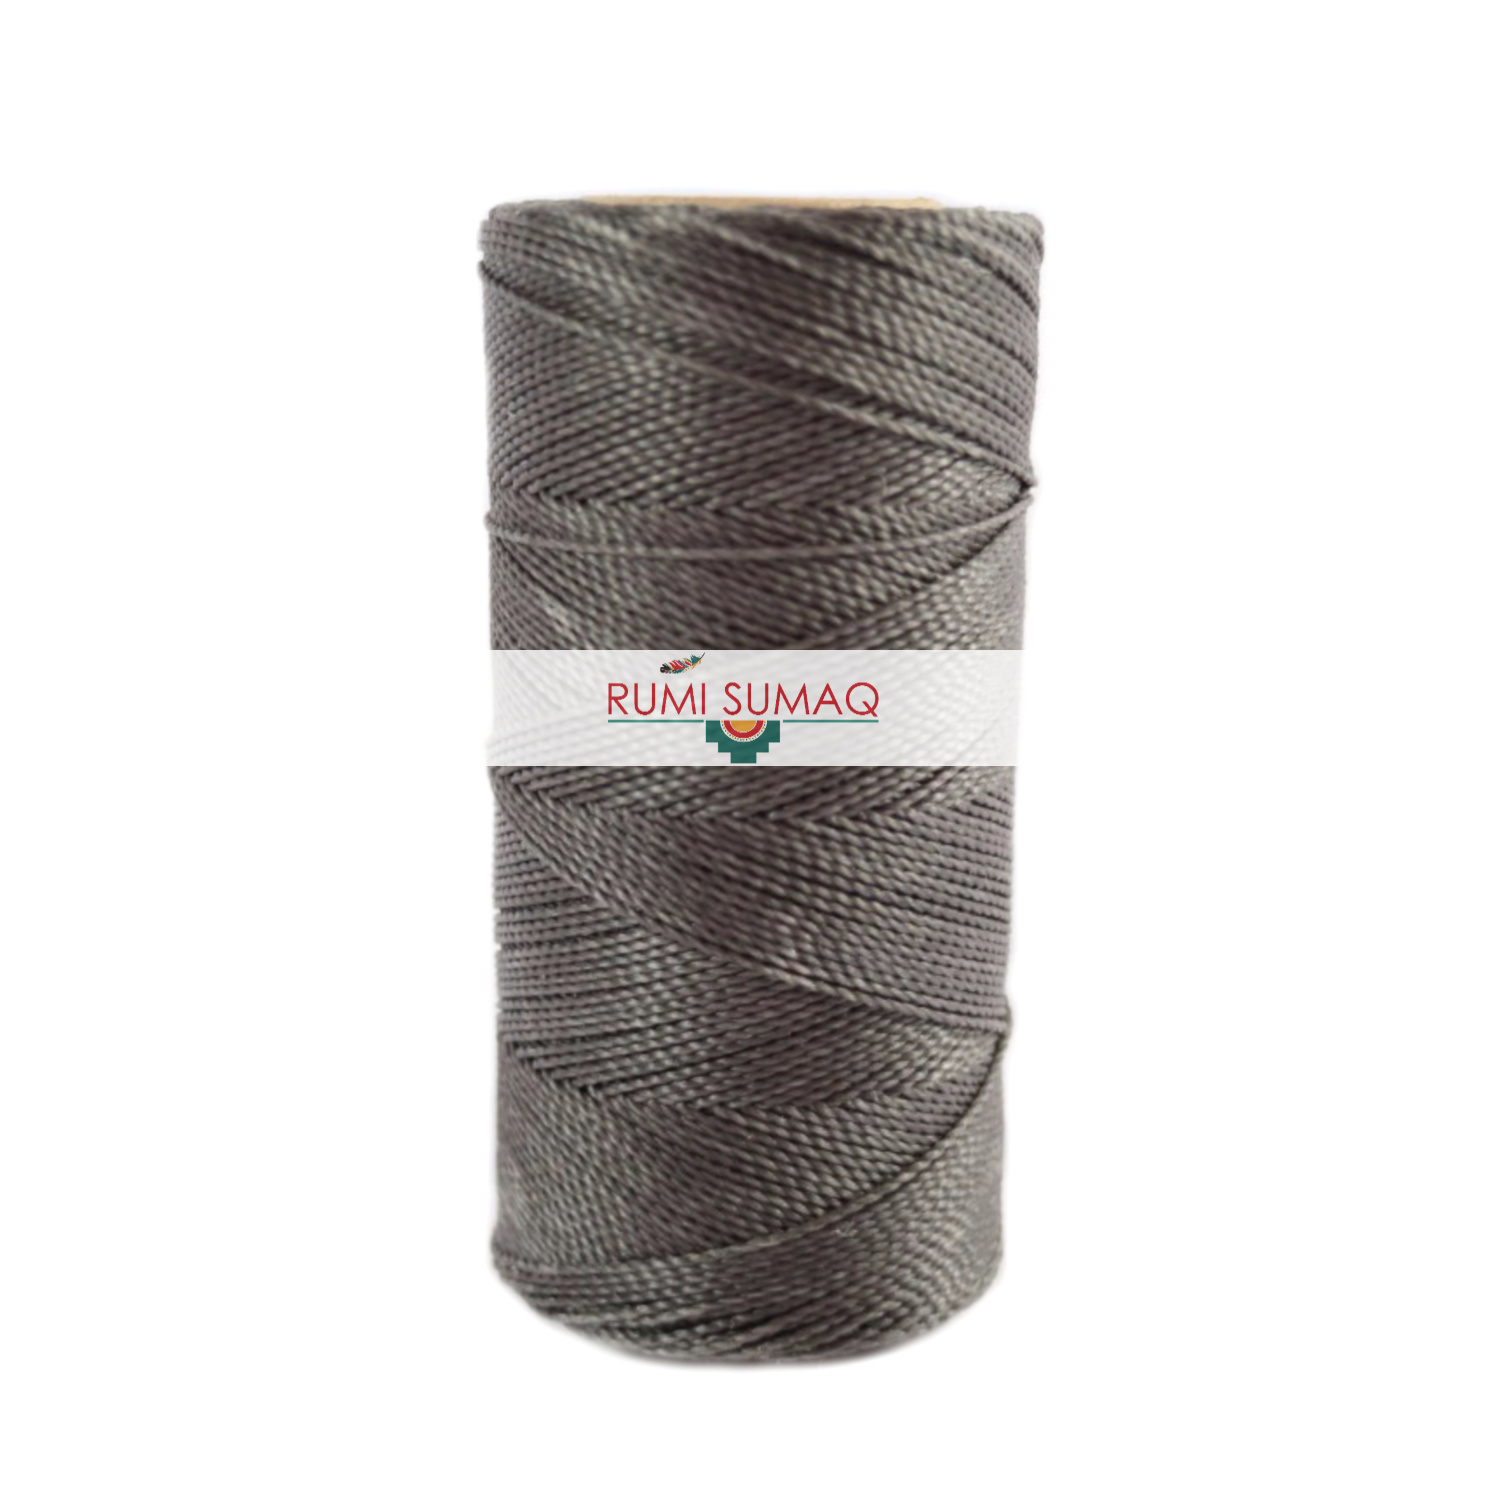 Find 1mm Linhasita 665 charcoal gray 2-ply waxed polyester cord at RUMI SUMAQ, the premier retailer for waxed cords for beading, basketry, leather, quilting